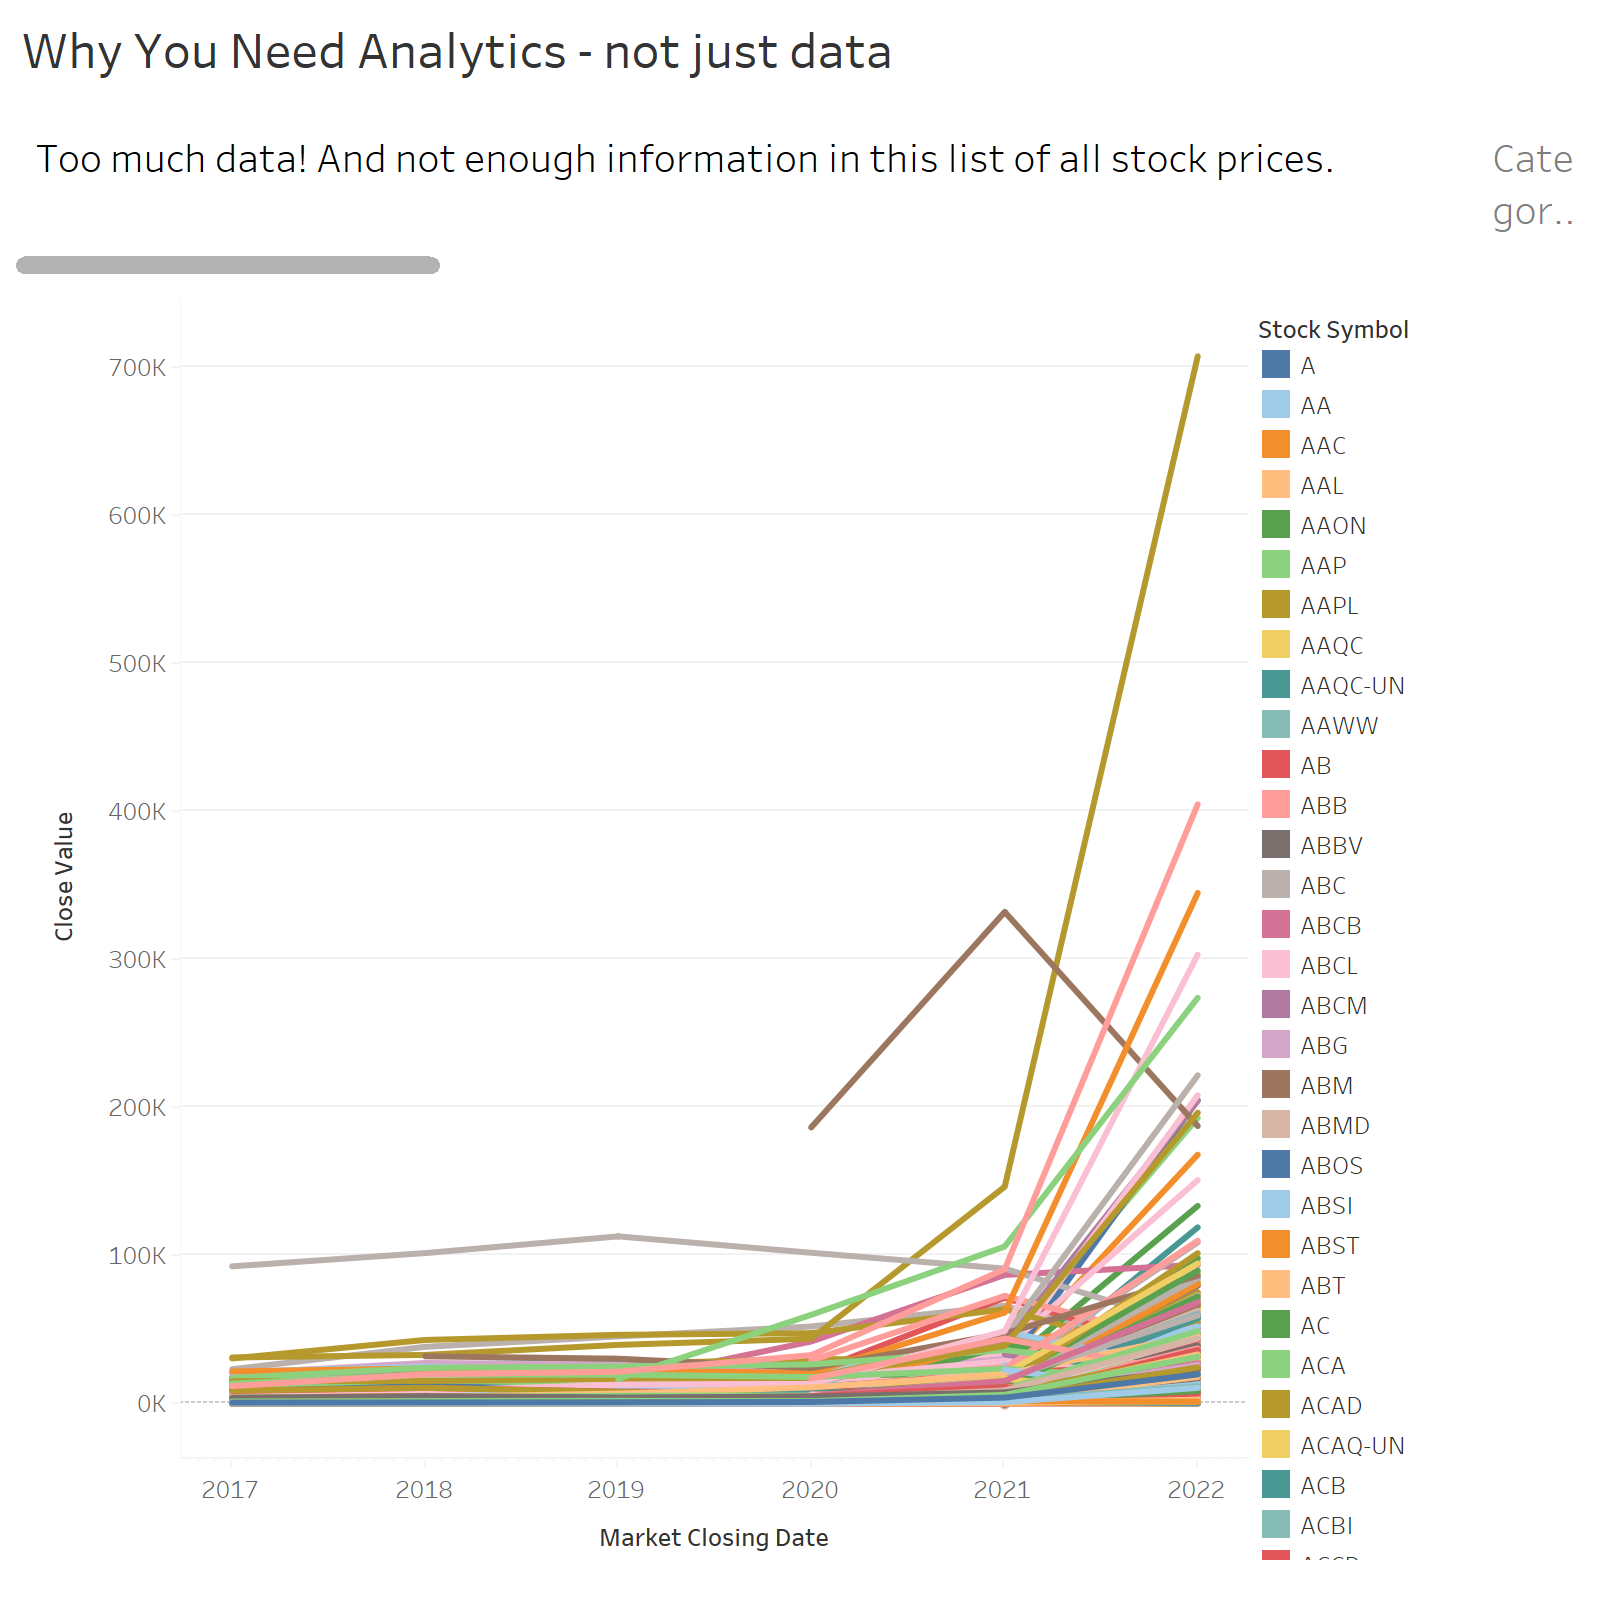 why you need analytics and not just data - messy graph with price data from too many stocks